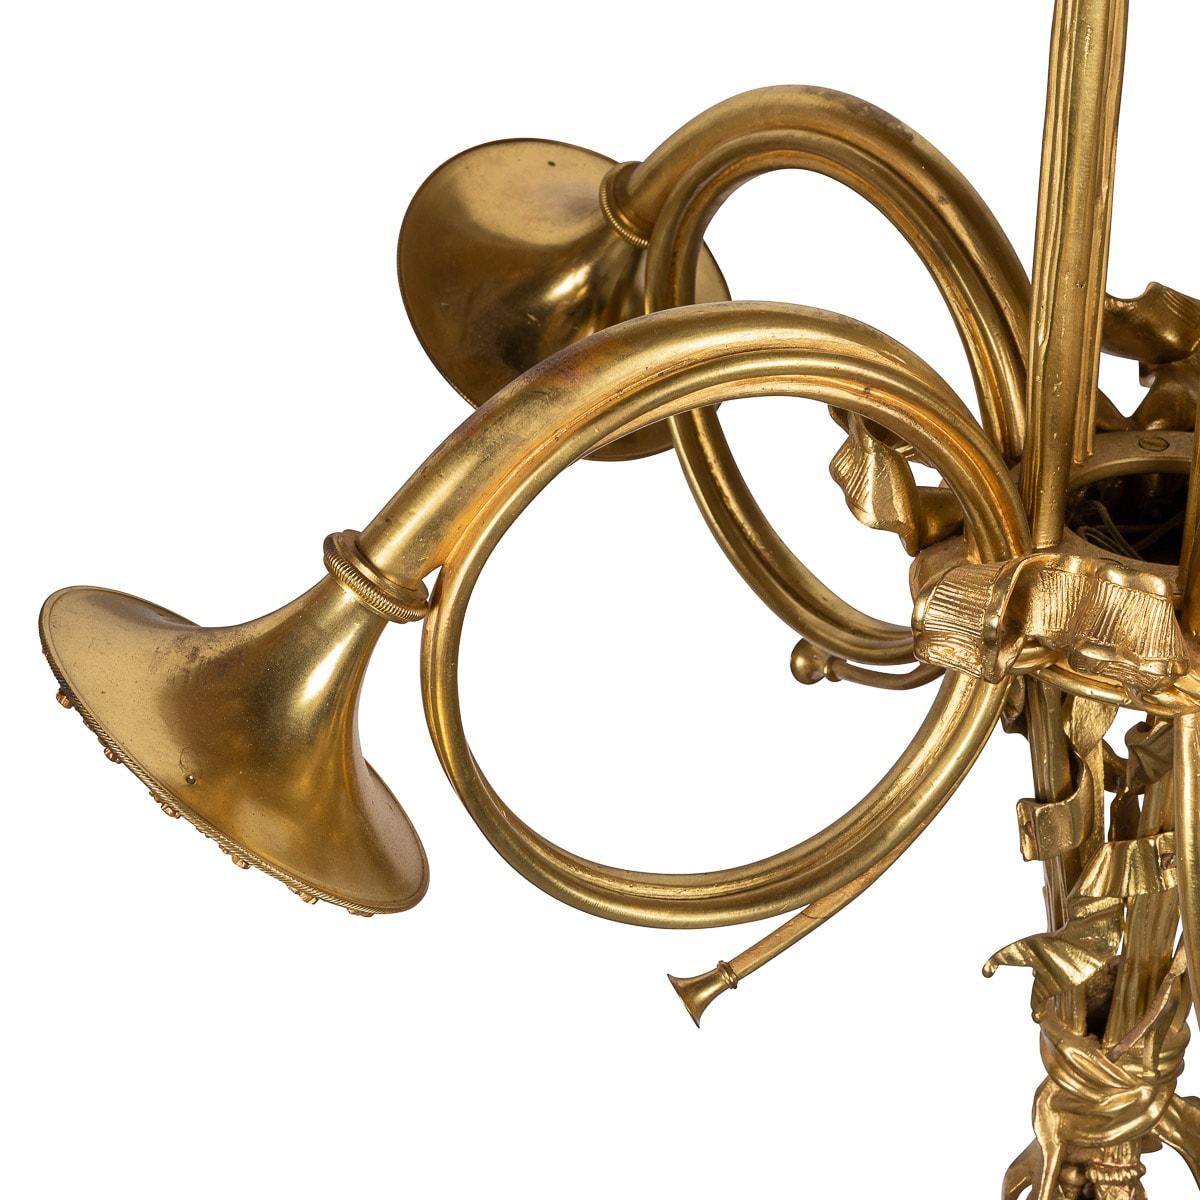 19th Century French Empire Ormolu Chandelier With Trumpet Light Fittings, c.1870 For Sale 3